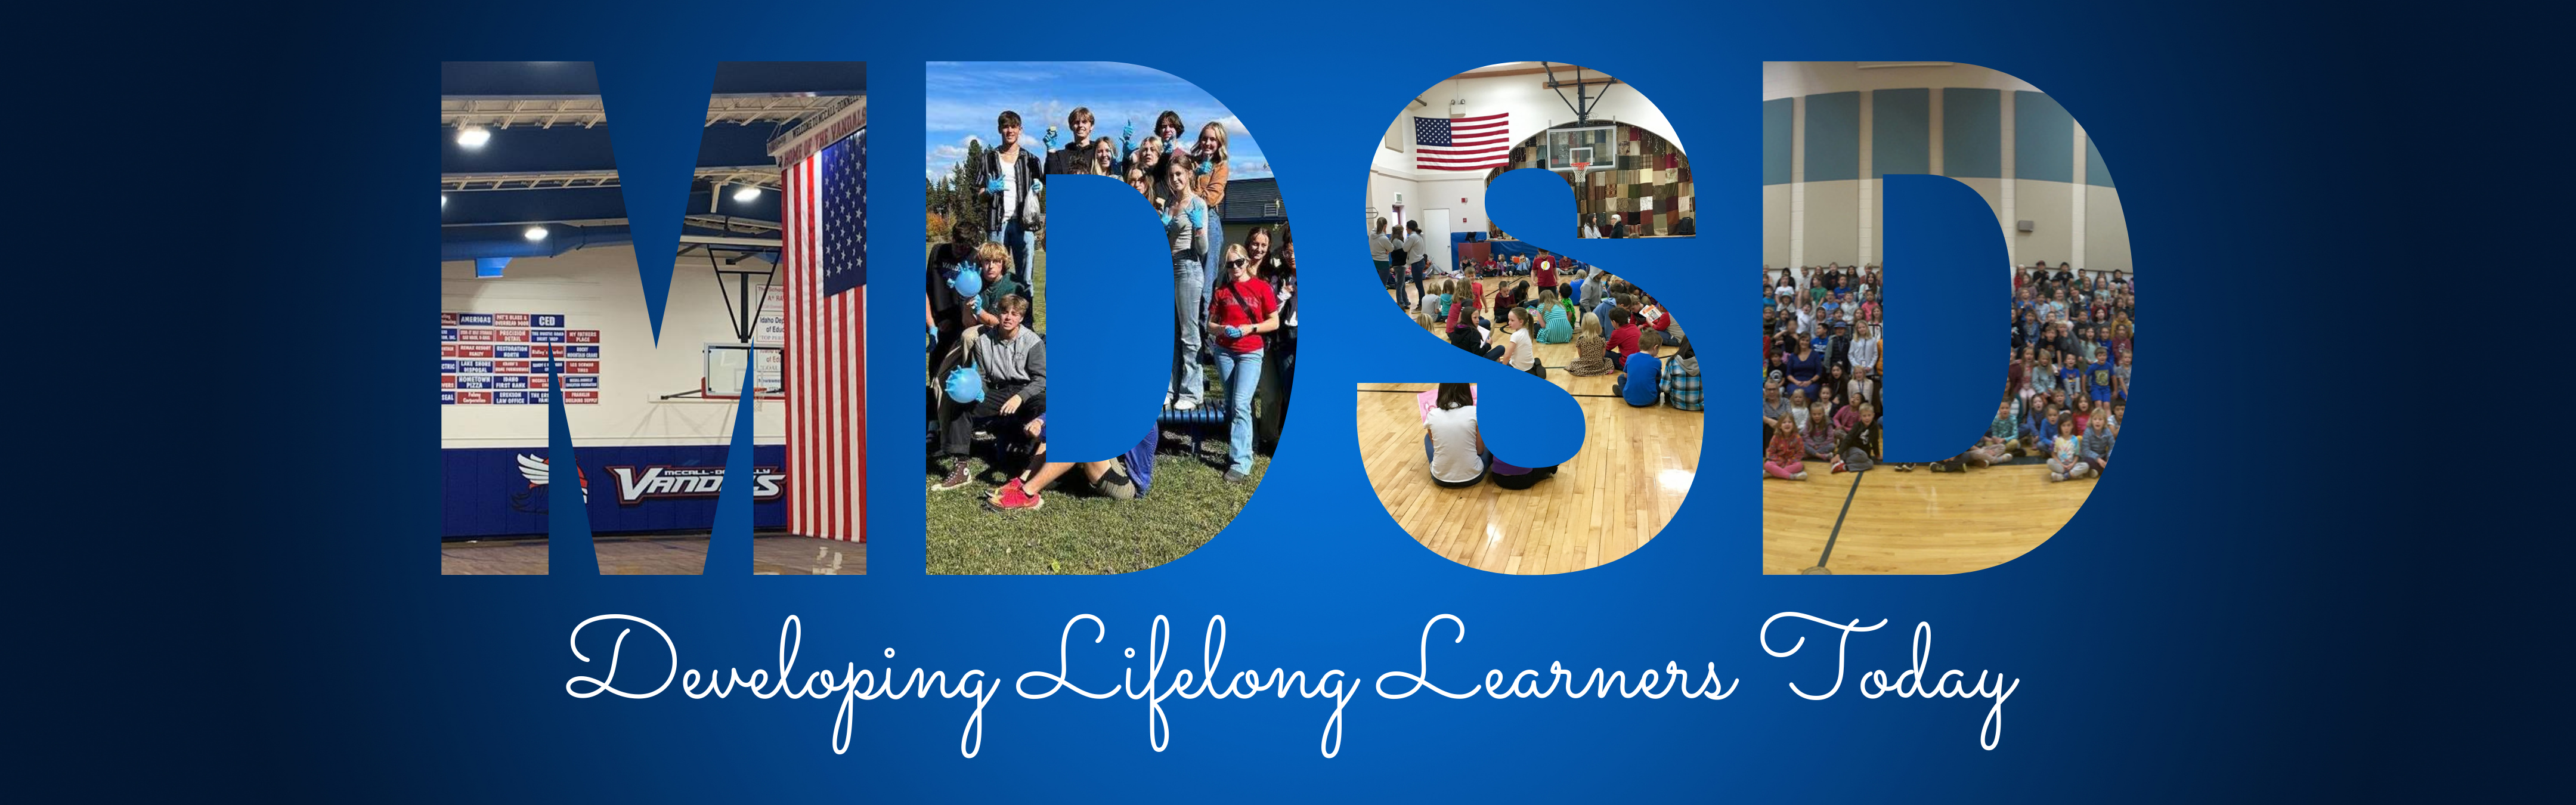 MDSD - Developing Lifelong Learners Today